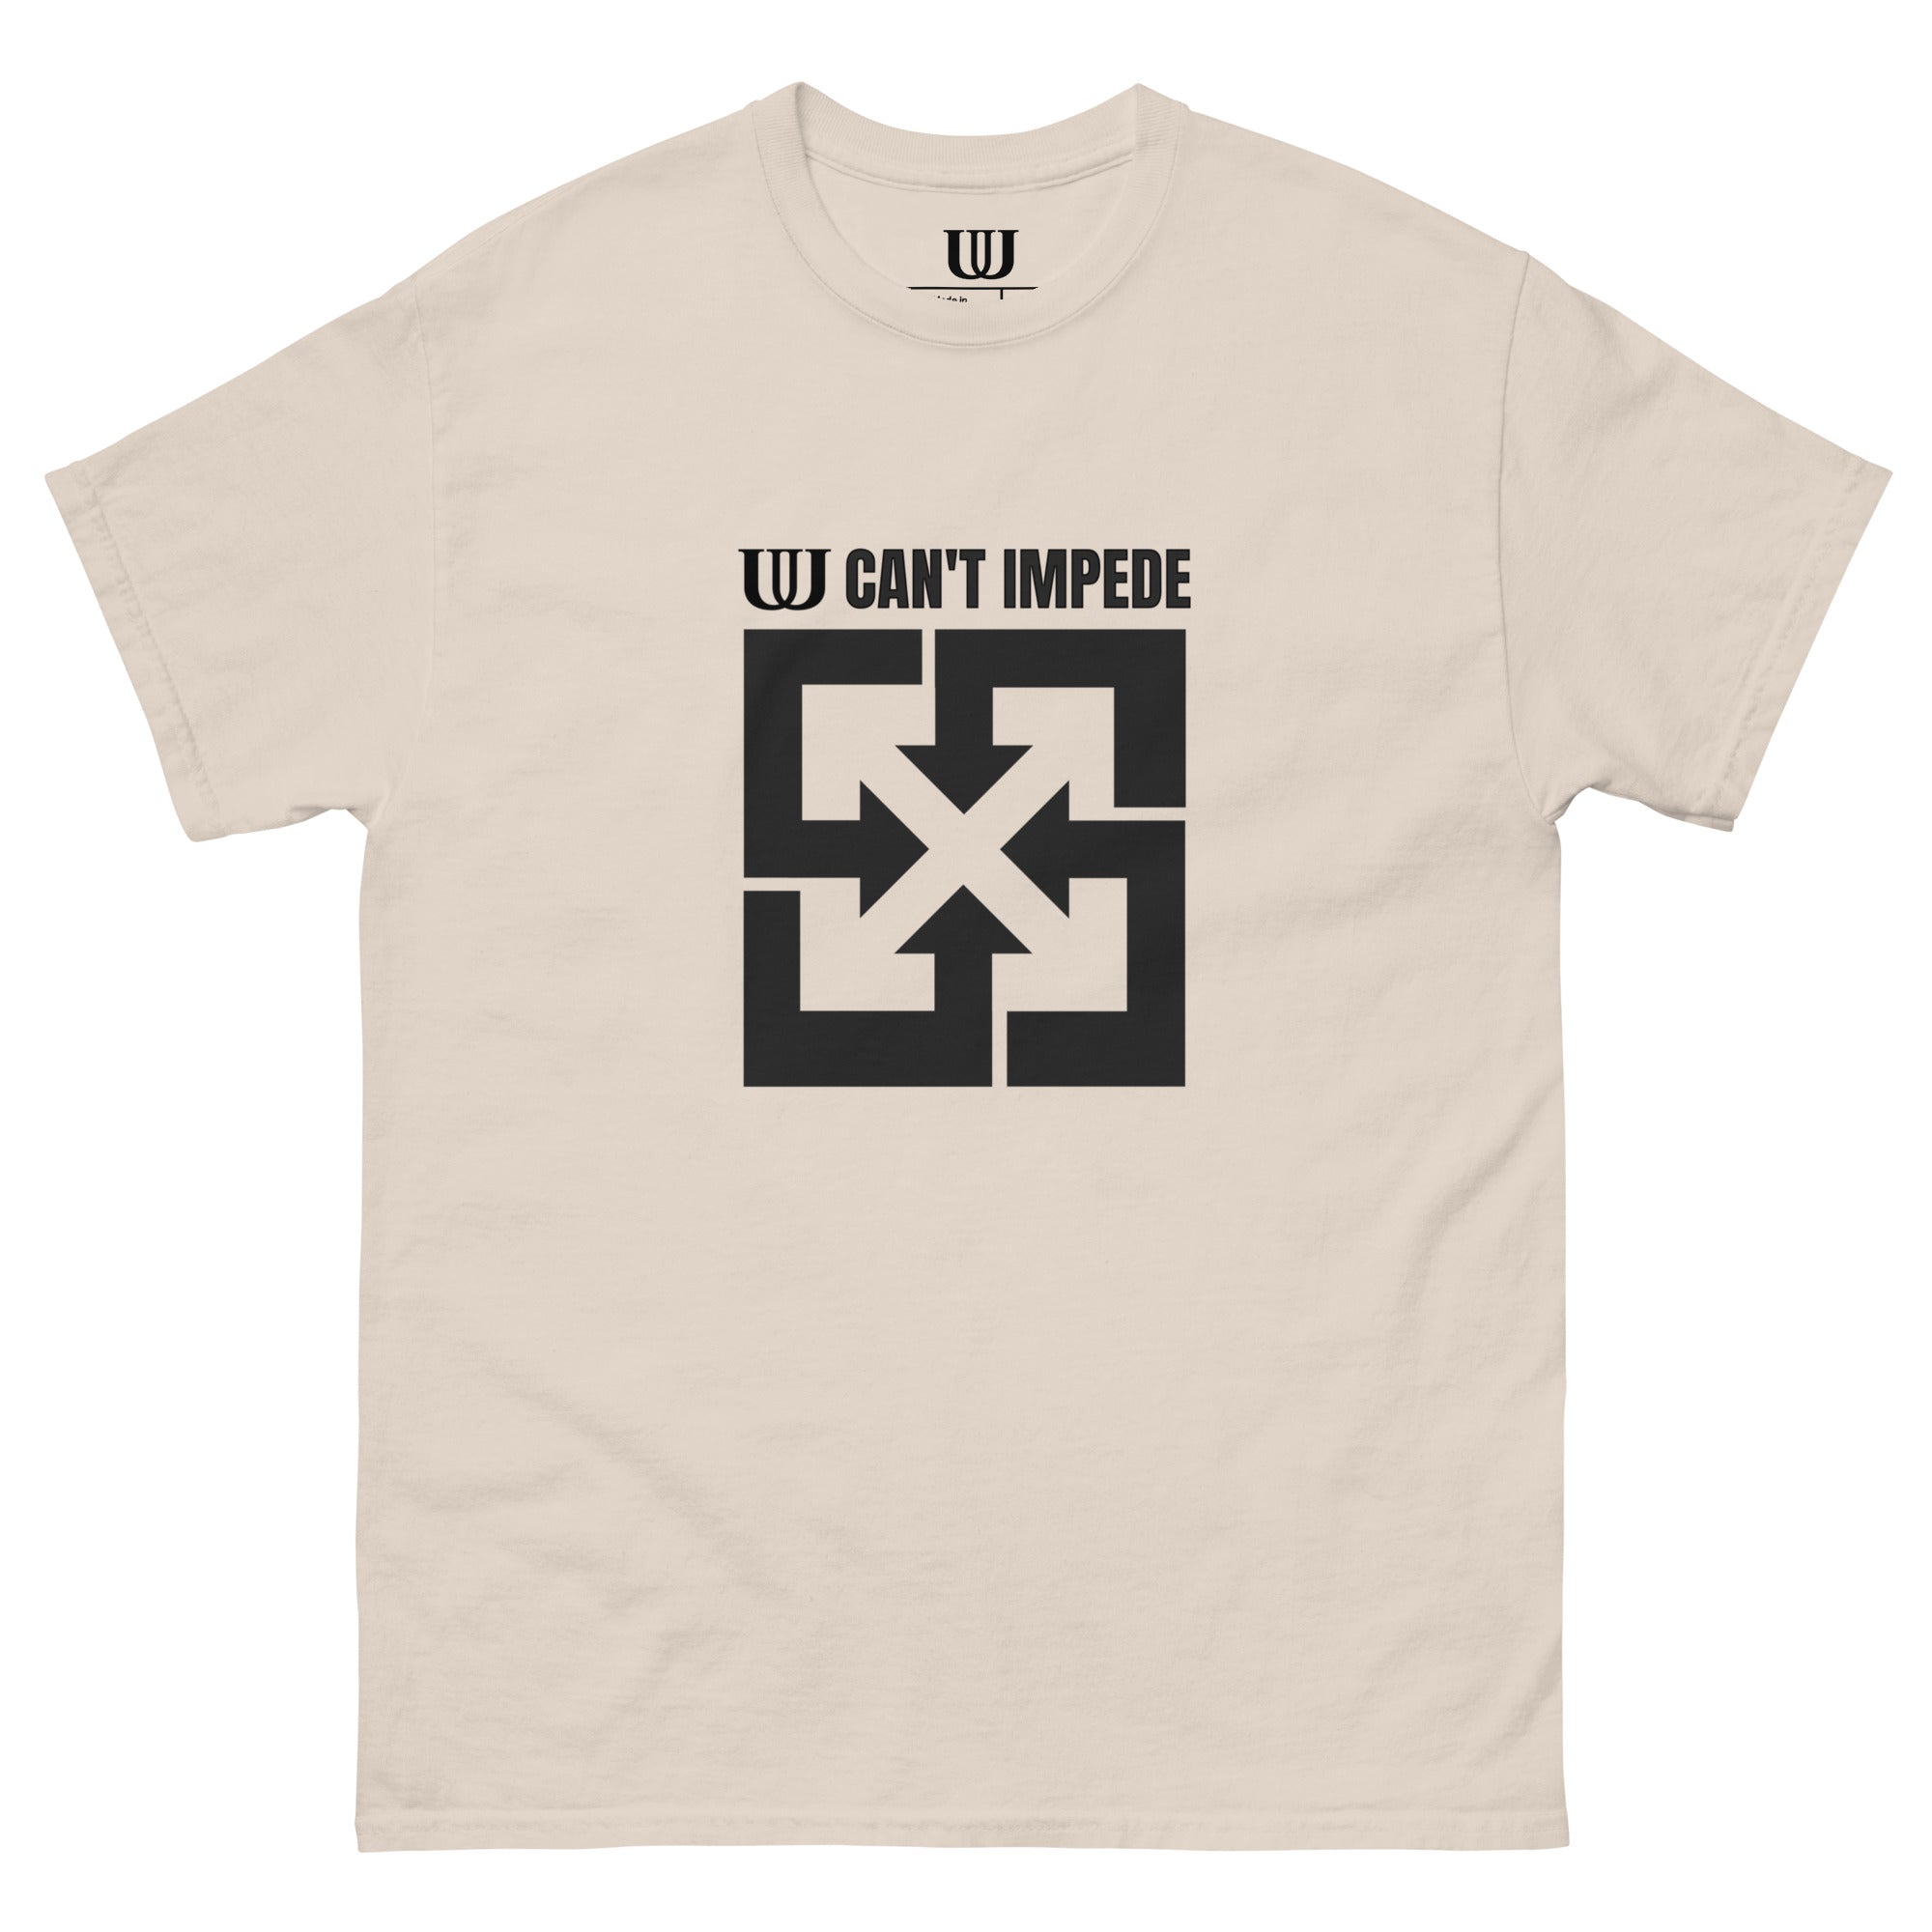 UU CAN'T IMPEDE T-SHIRT